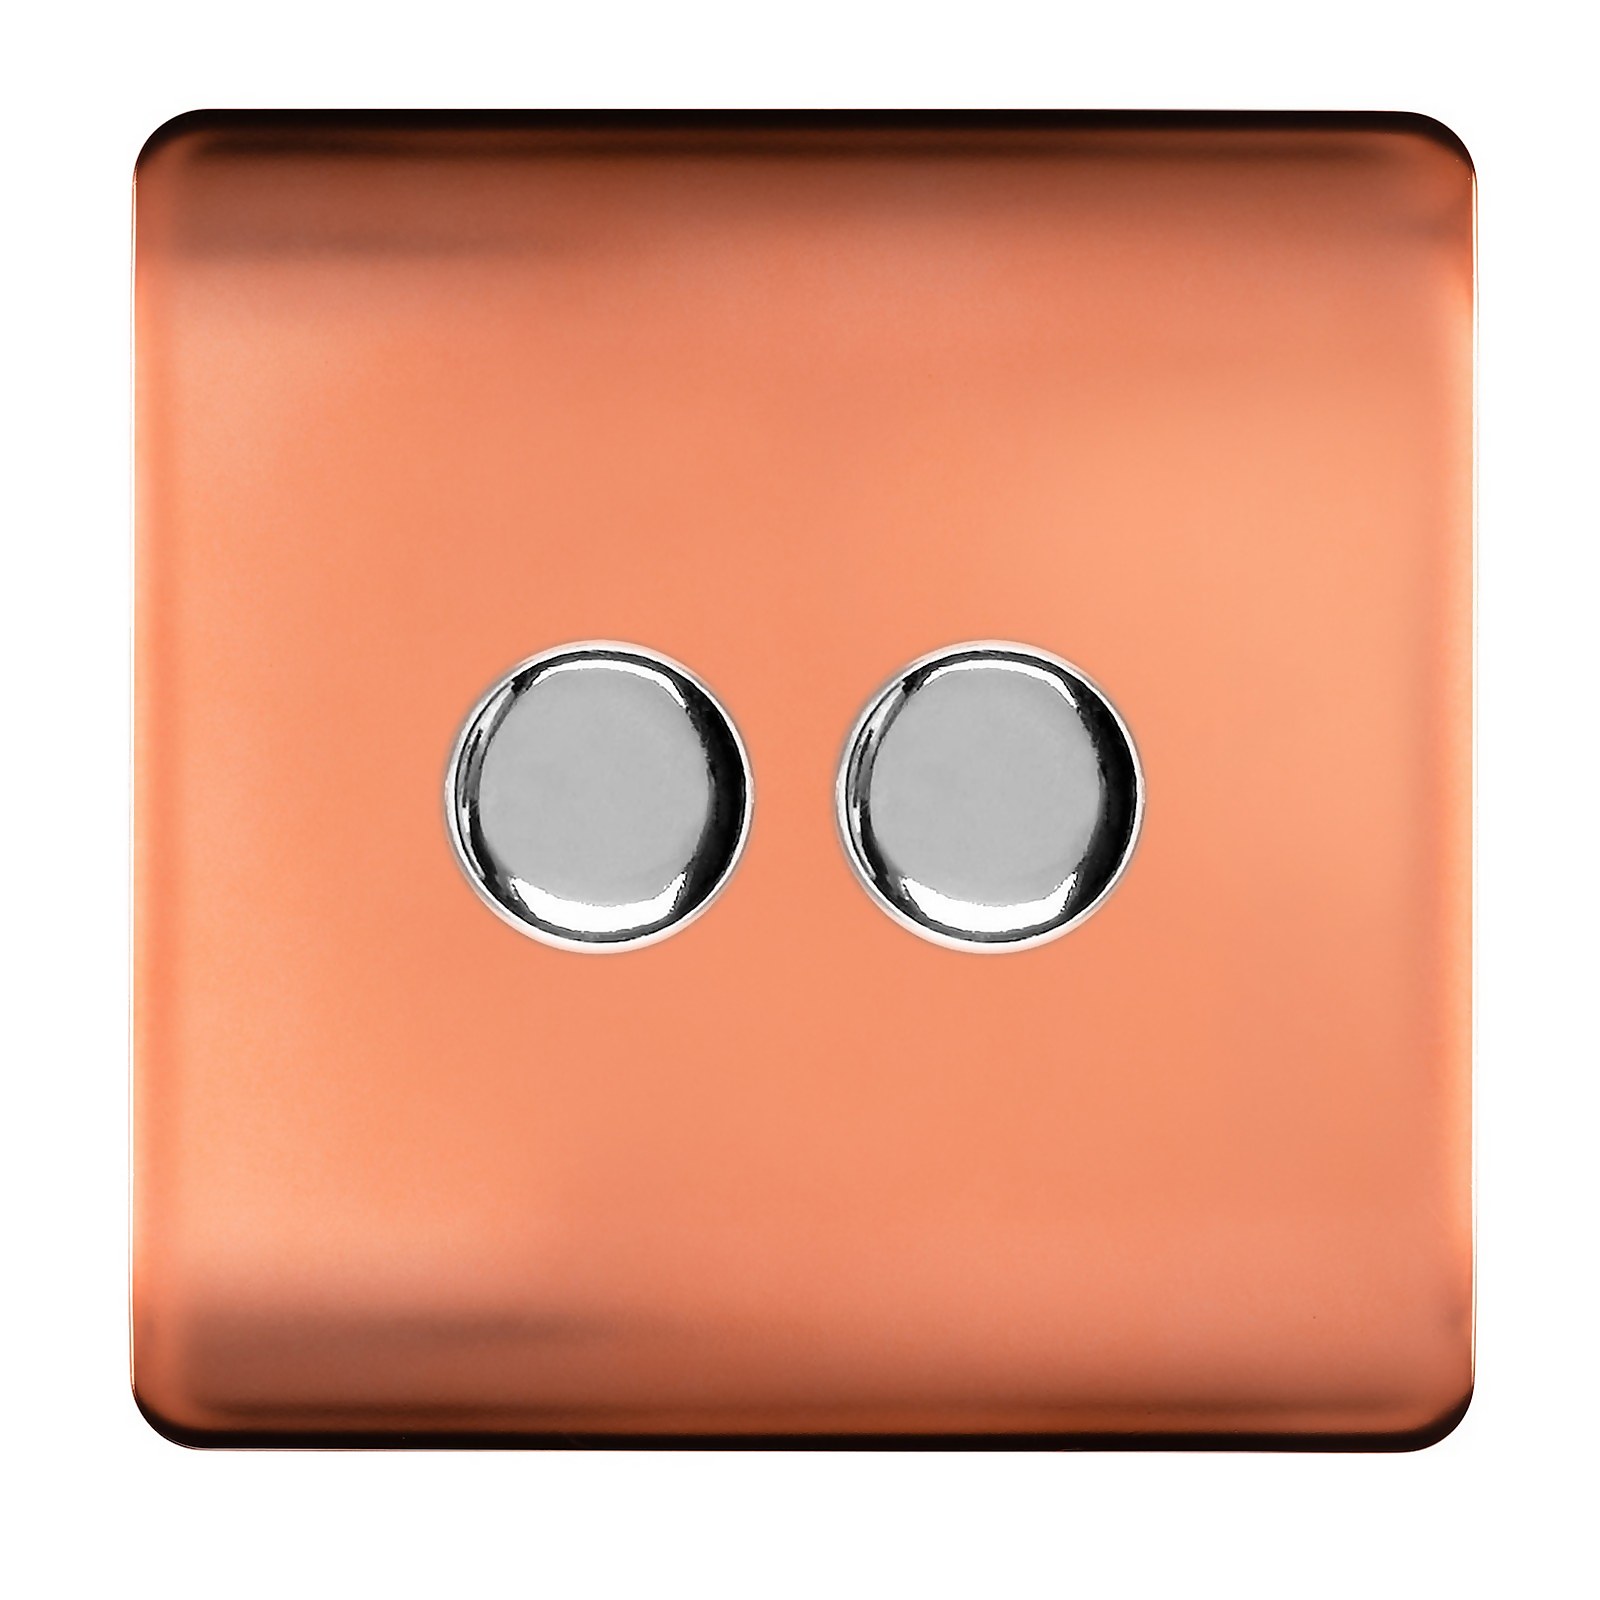 Photo of Trendi Switch Double Led Dimmer Switch - Copper